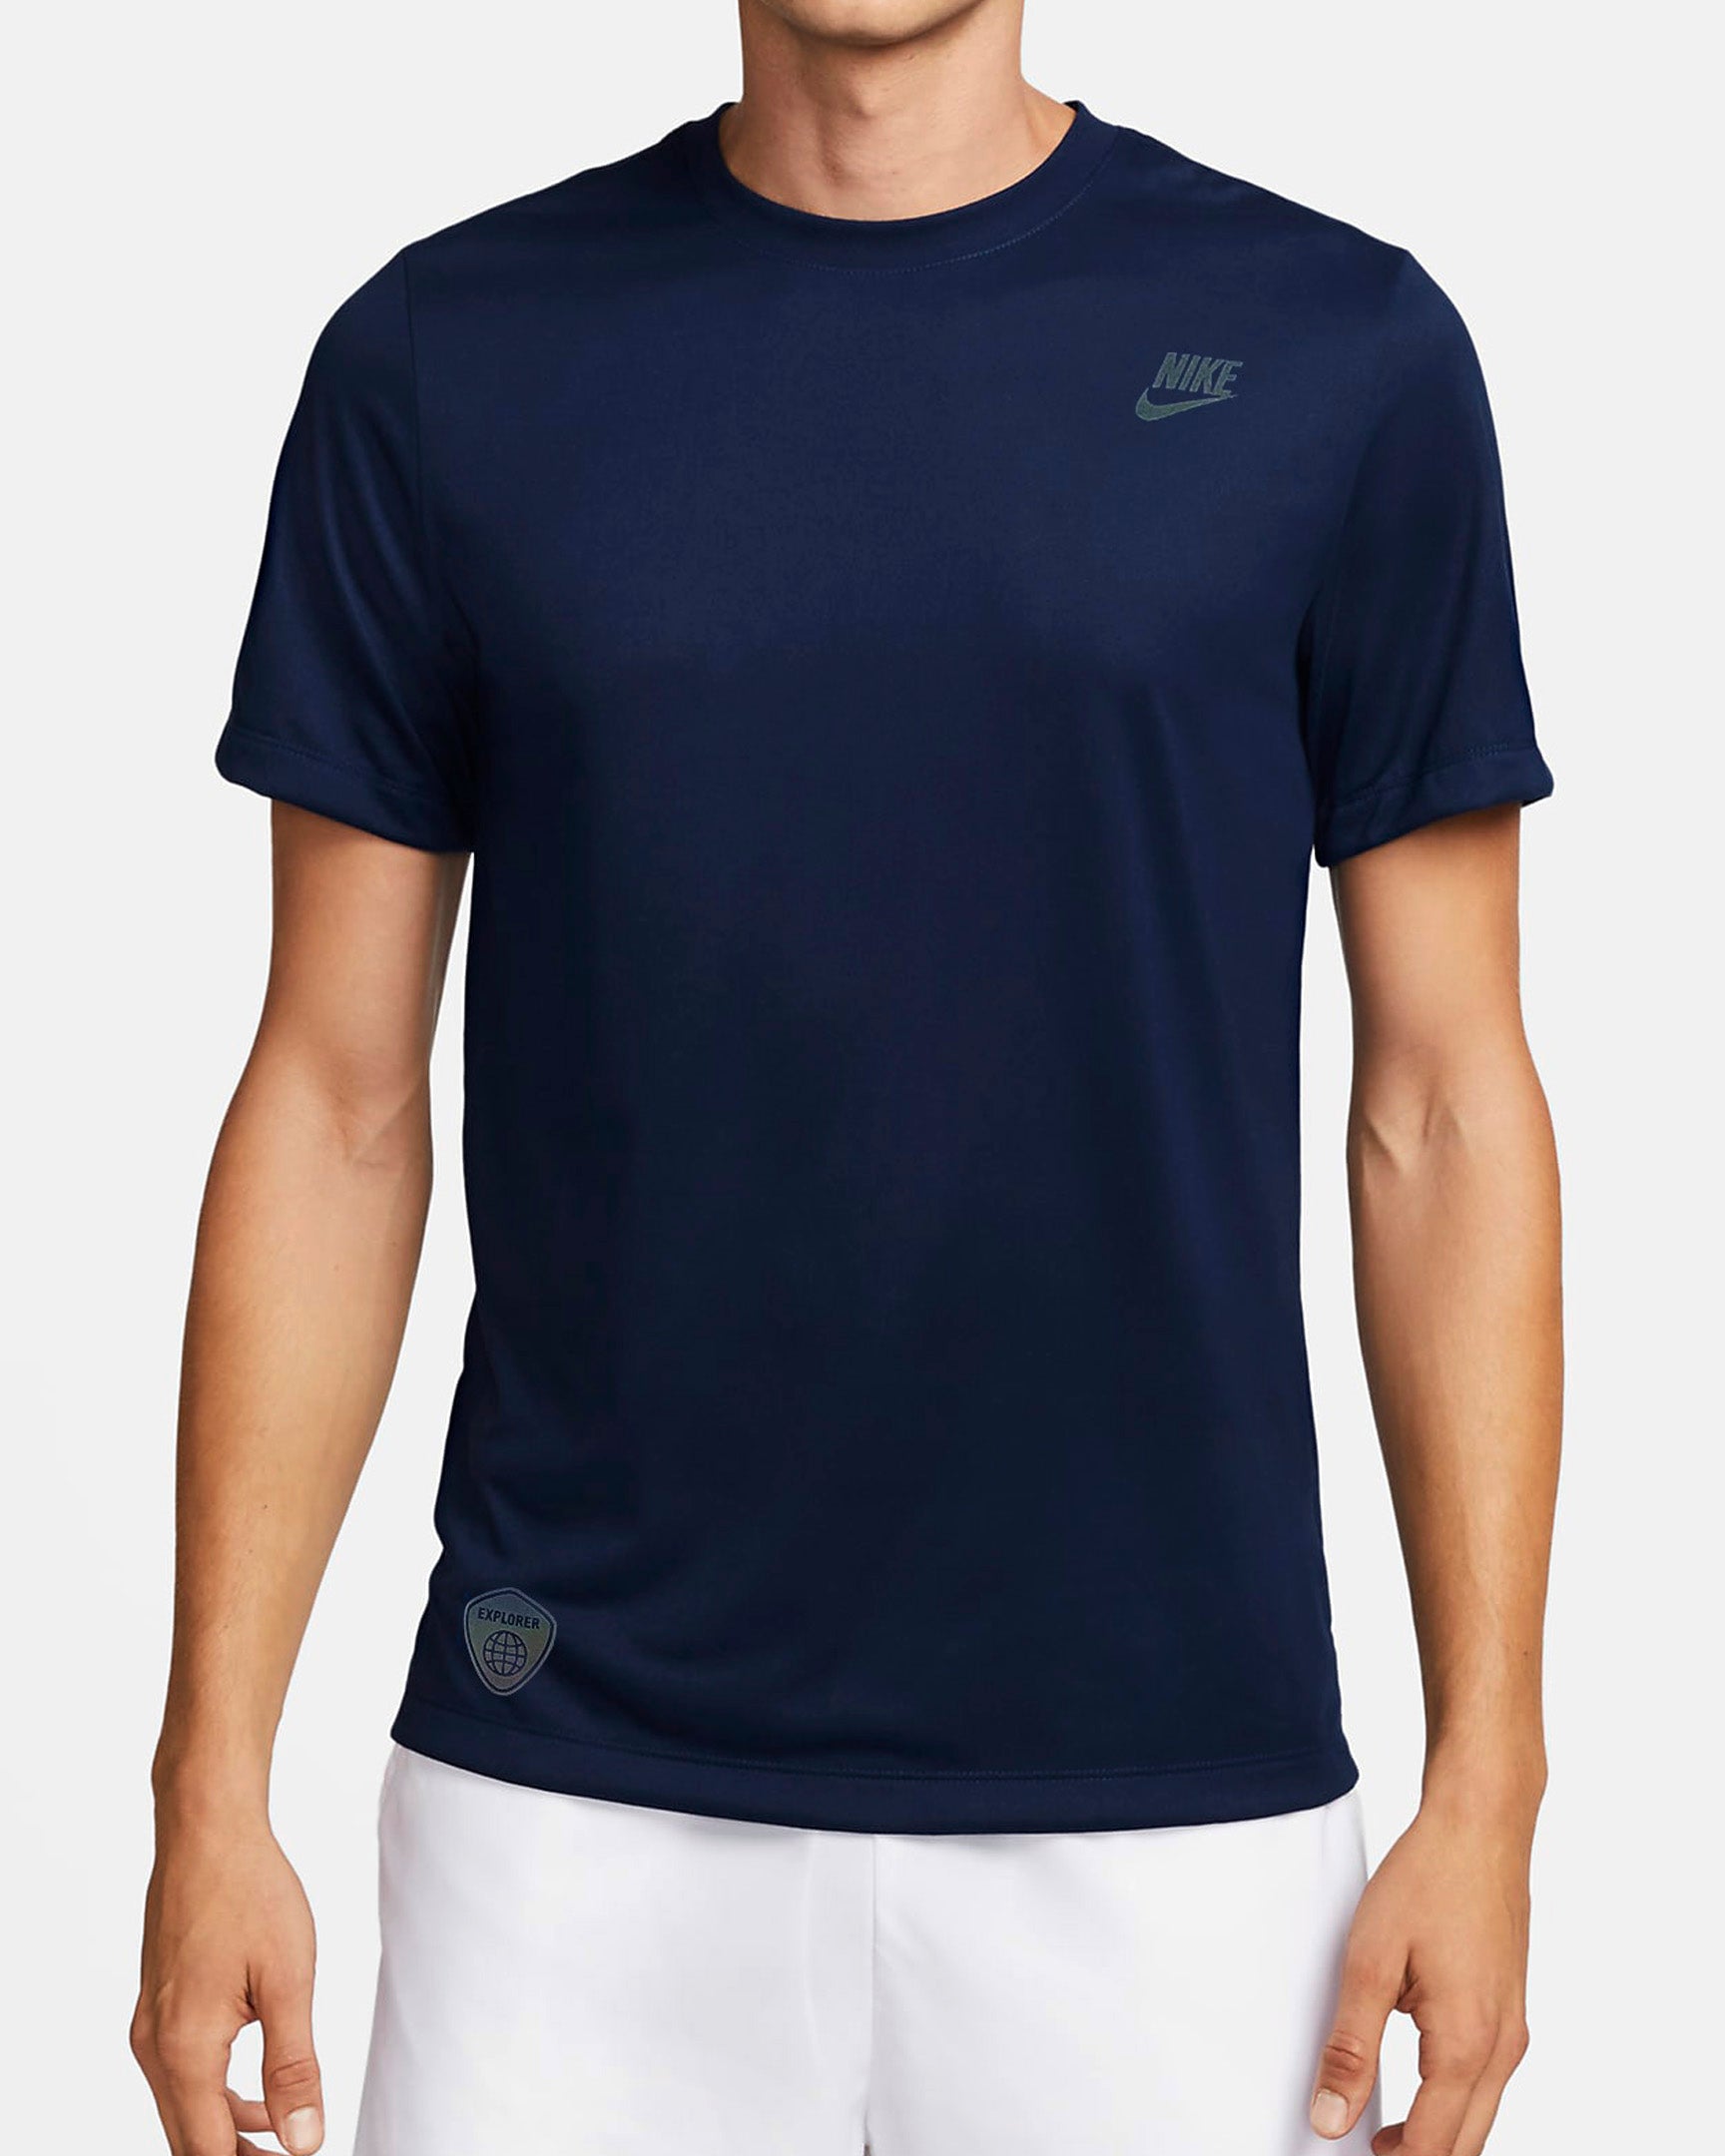 Imported Plain Dry Fit Tee In Navy Blue